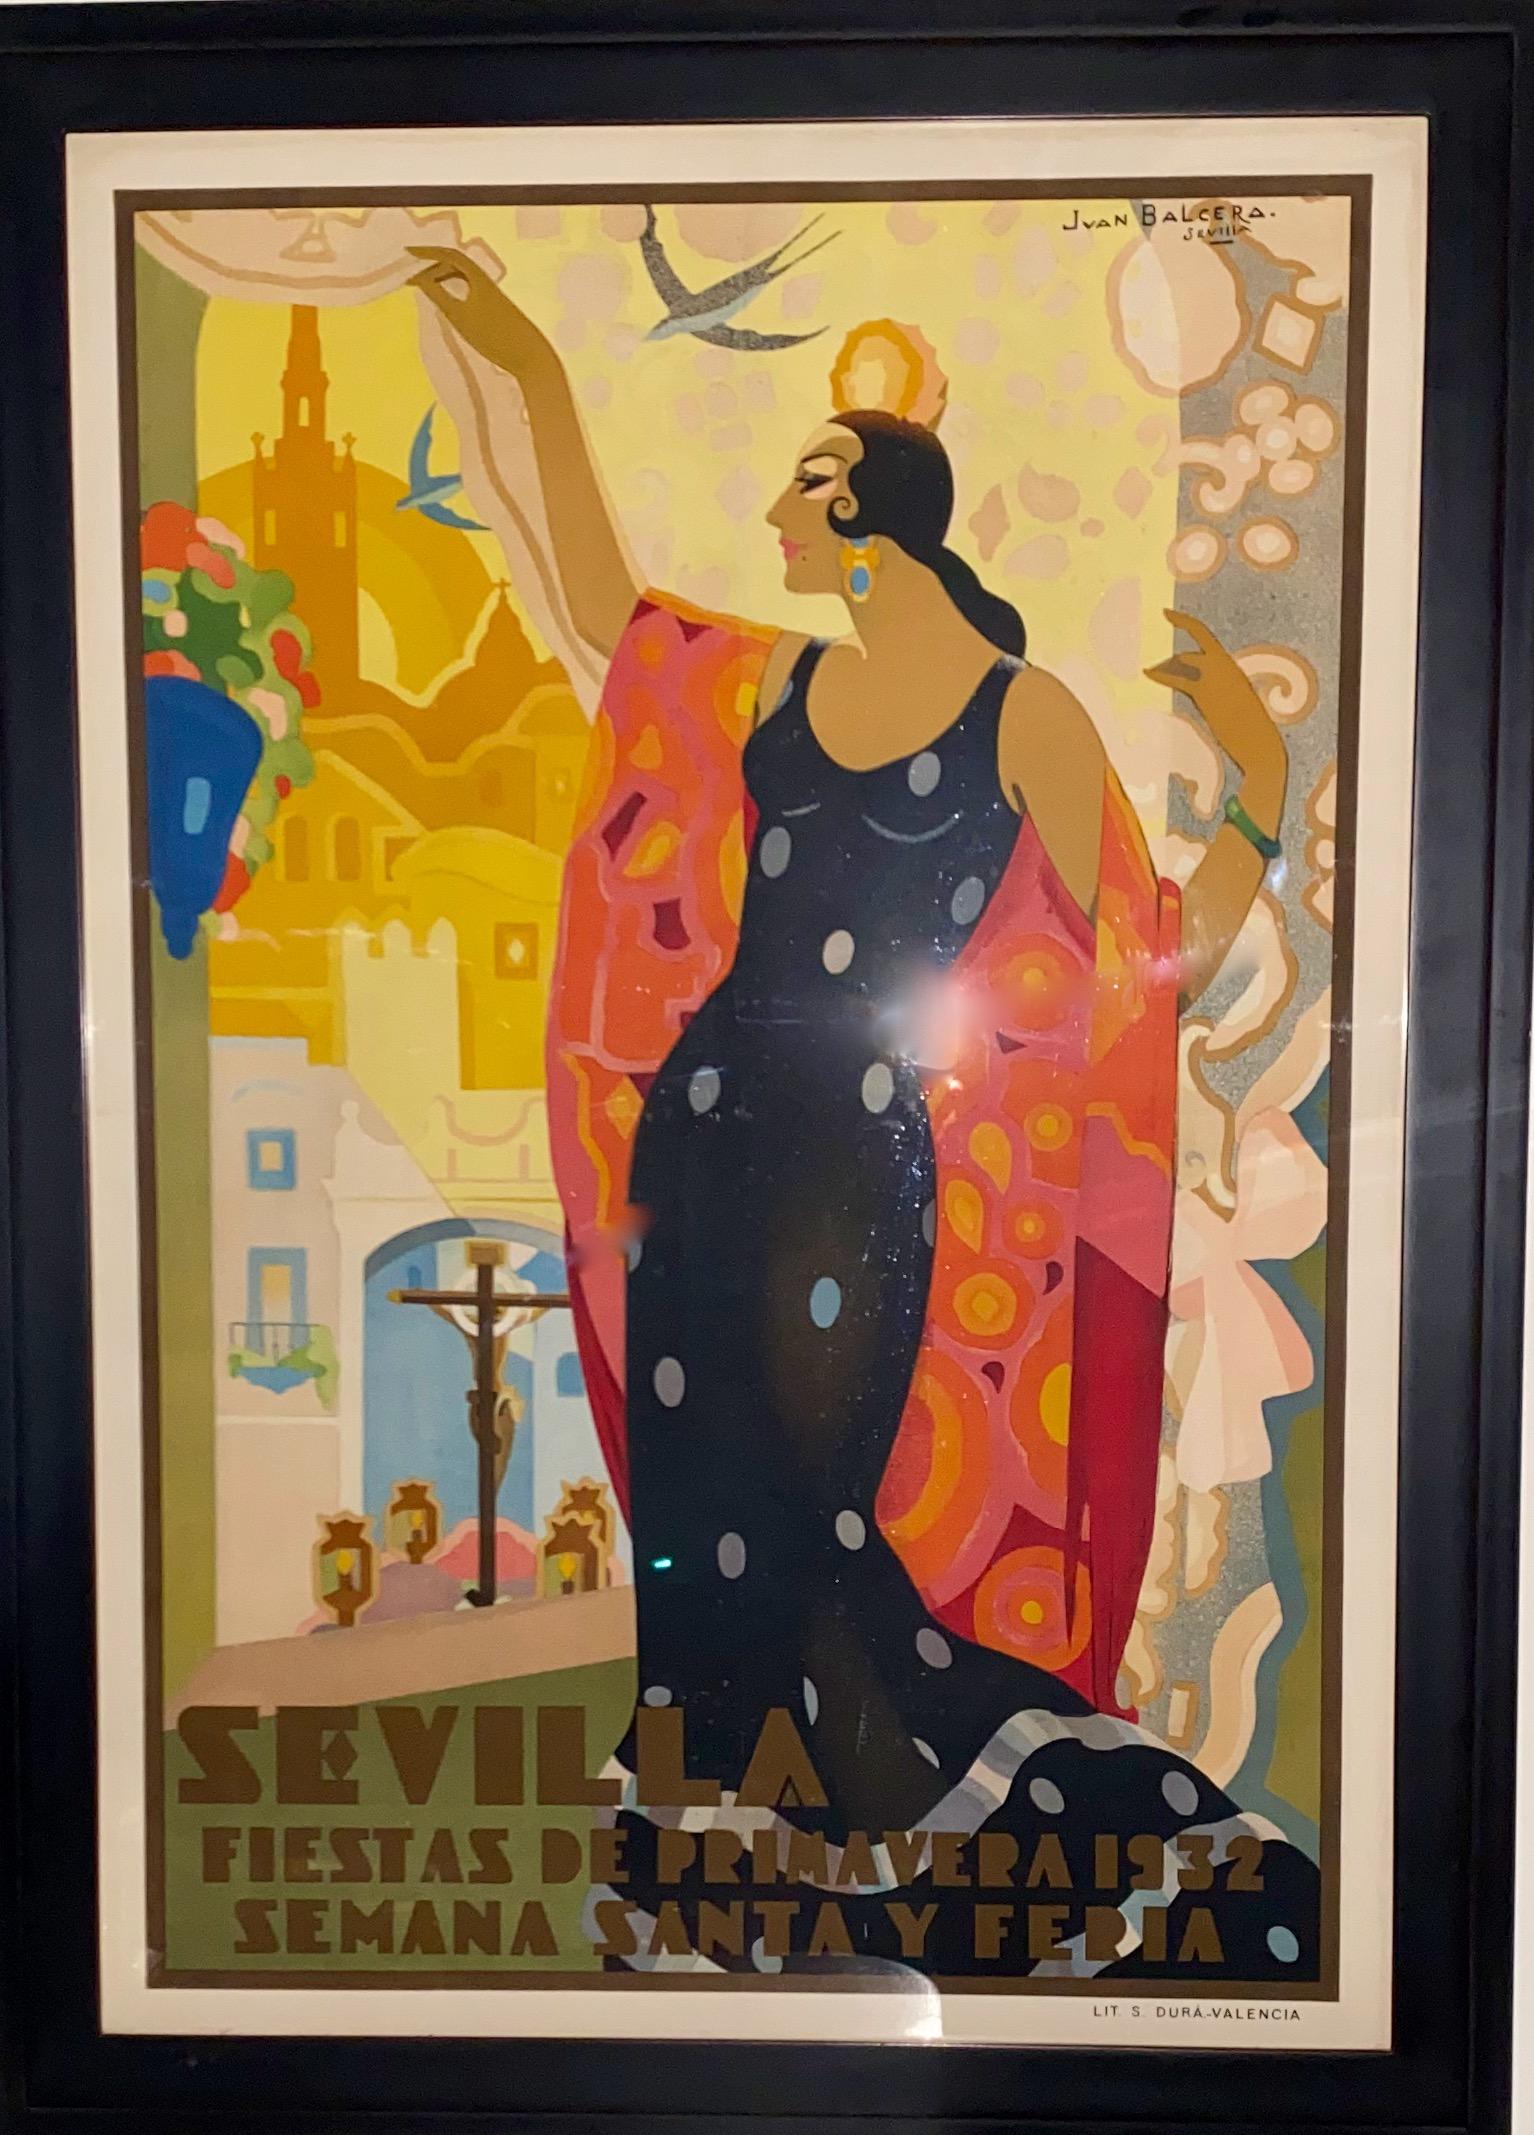 Original Linen-backed Lithographic Poster for 1932 Seville Fiesta De Primavera by artist Juan Bacera. Travel poster promoting Spring in Sevilla, Spain. Portrays a beautifully rendered Spanish Art Deco glamorous woman also showing buildings,